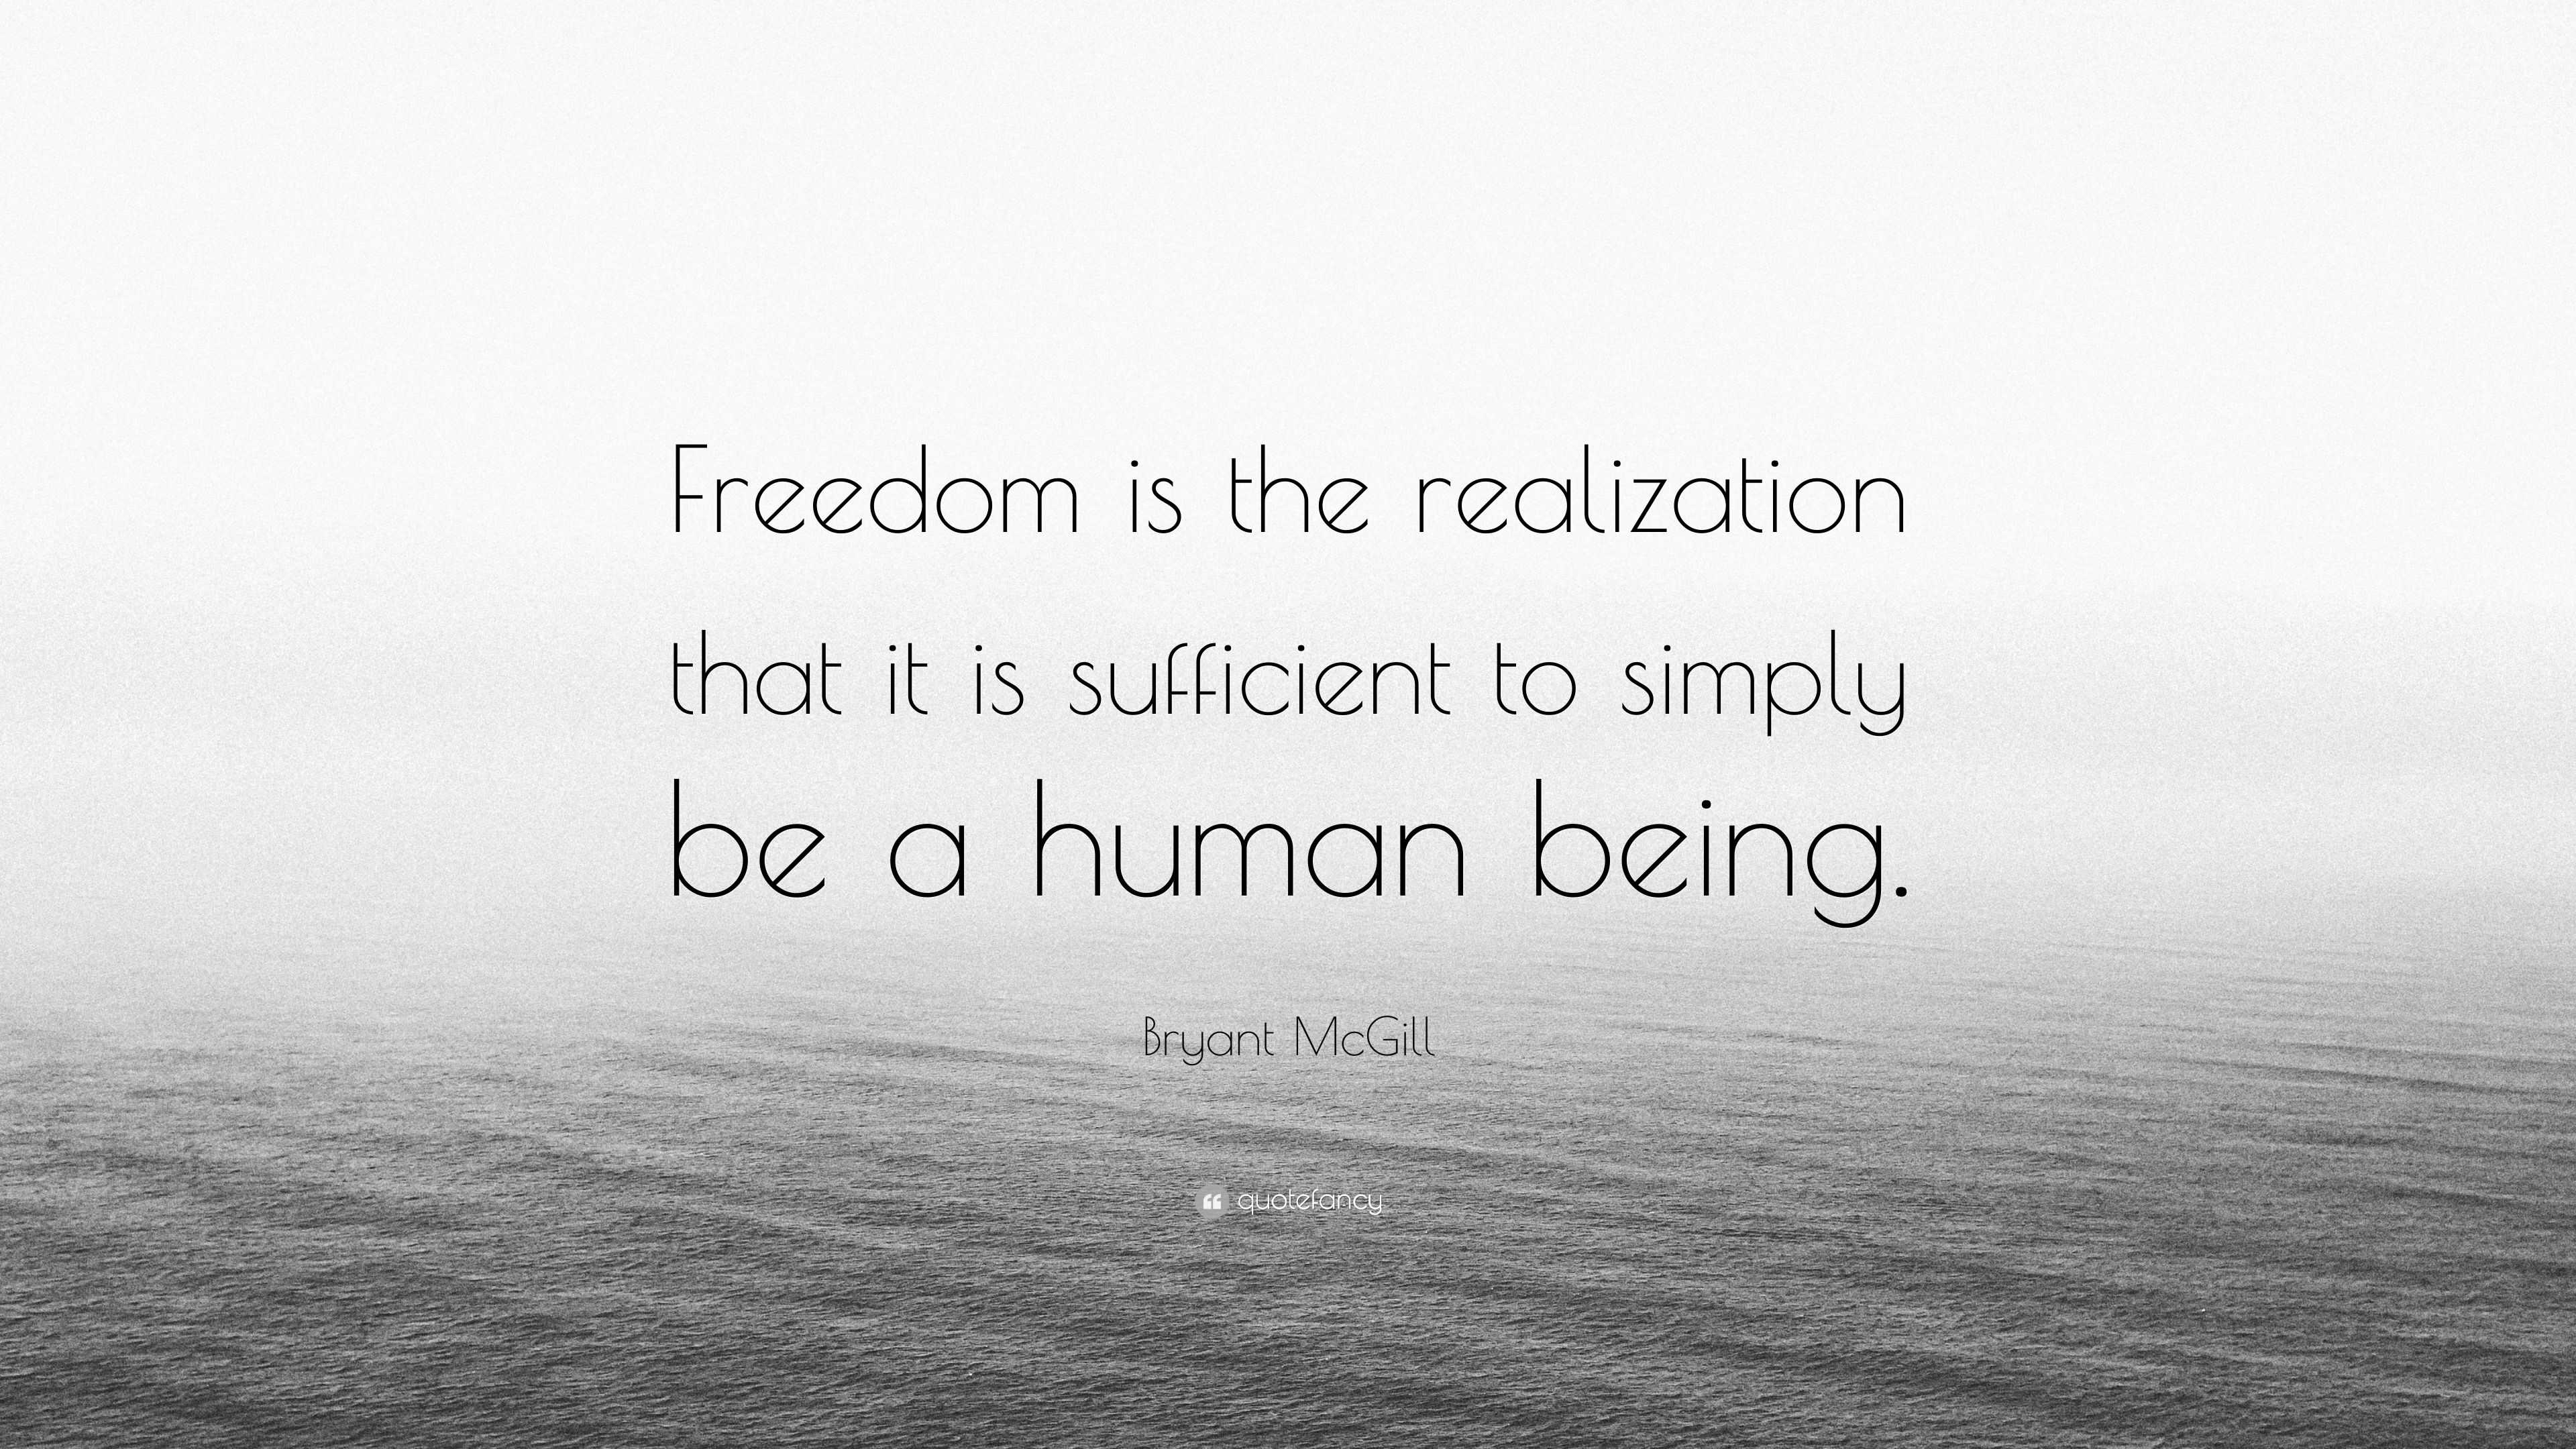 Bryant McGill Quote: “Freedom is the realization that it is sufficient to simply be a human